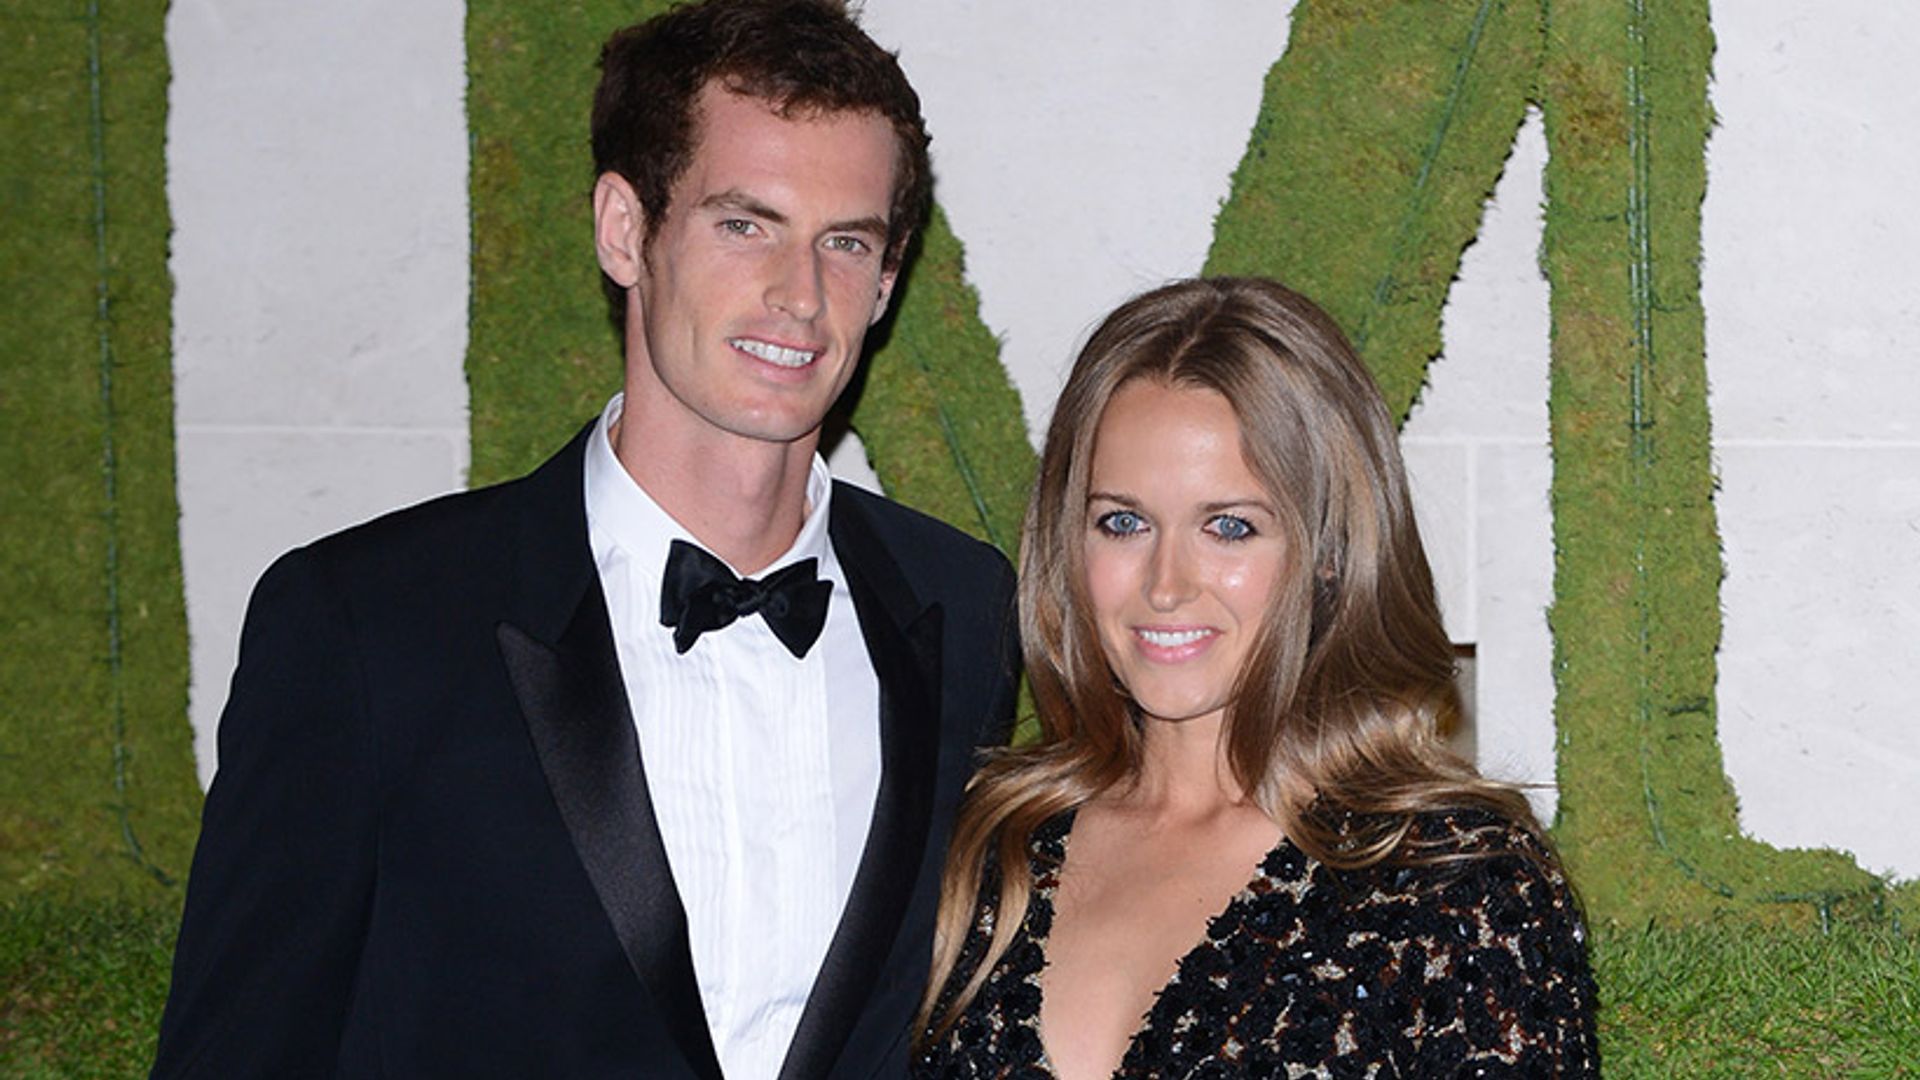 Andy Murray opens up about family life ahead of Wimbledon final